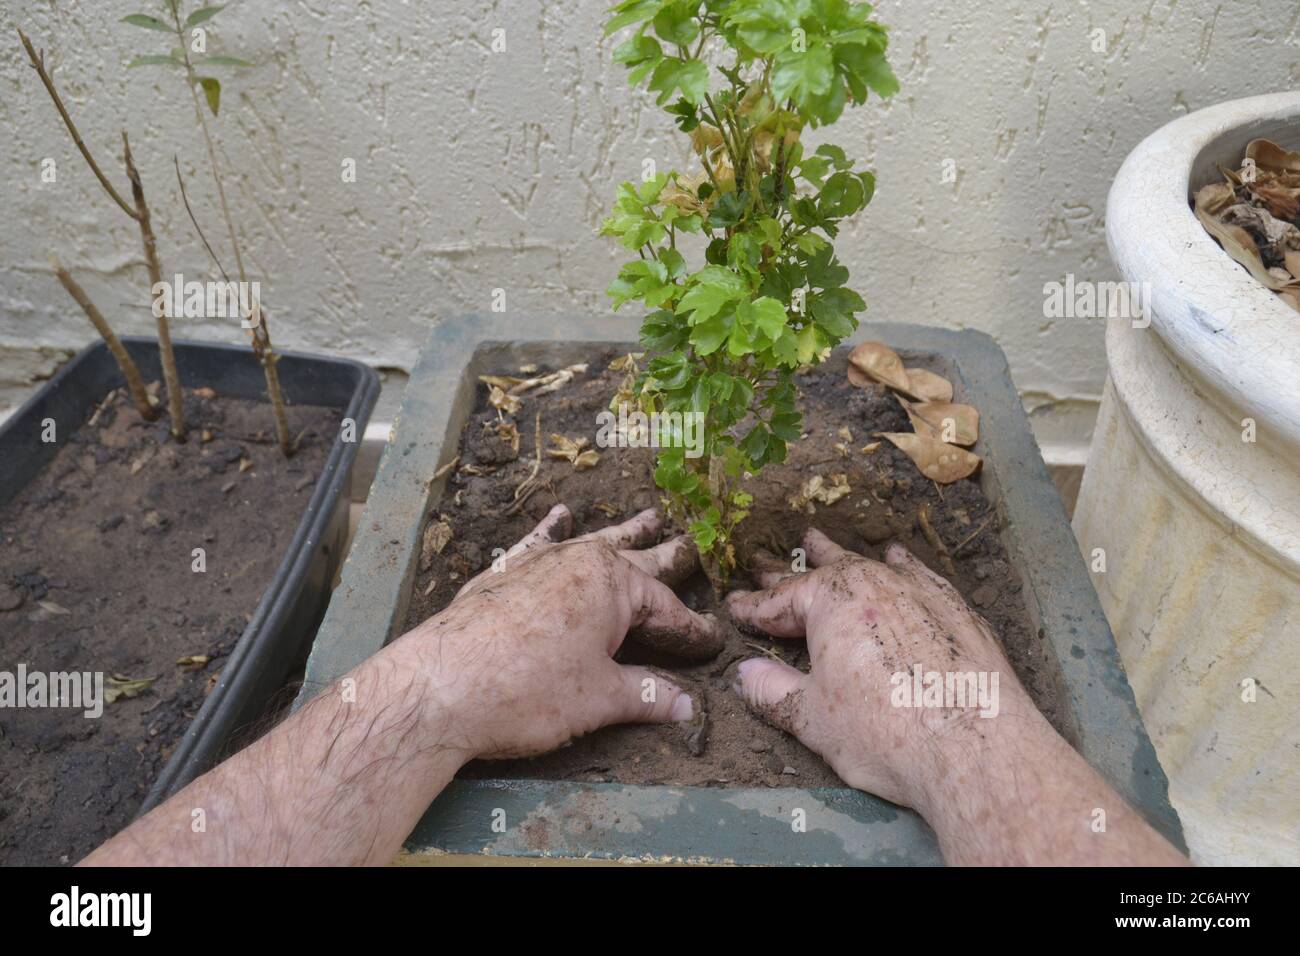 Hands of elderly man planting flowers in the garden at home, in stone pot, photo from top to bottom, with emphasis on hands, on white background with Stock Photo